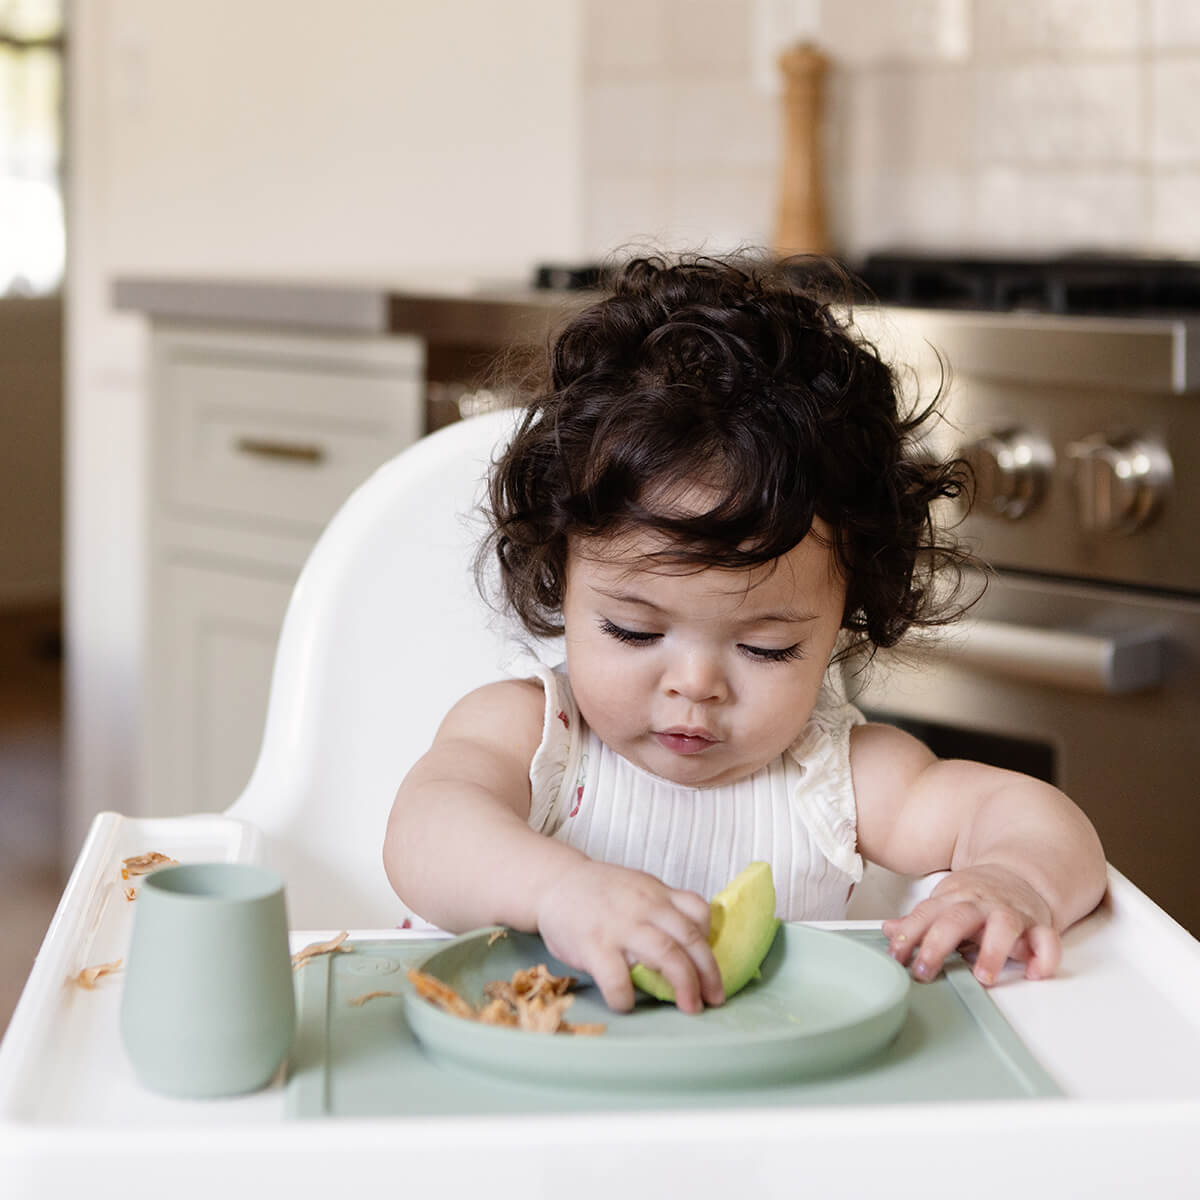 ezpz tiny plate in sage green / silicone plate for babies that suctions to the highchair